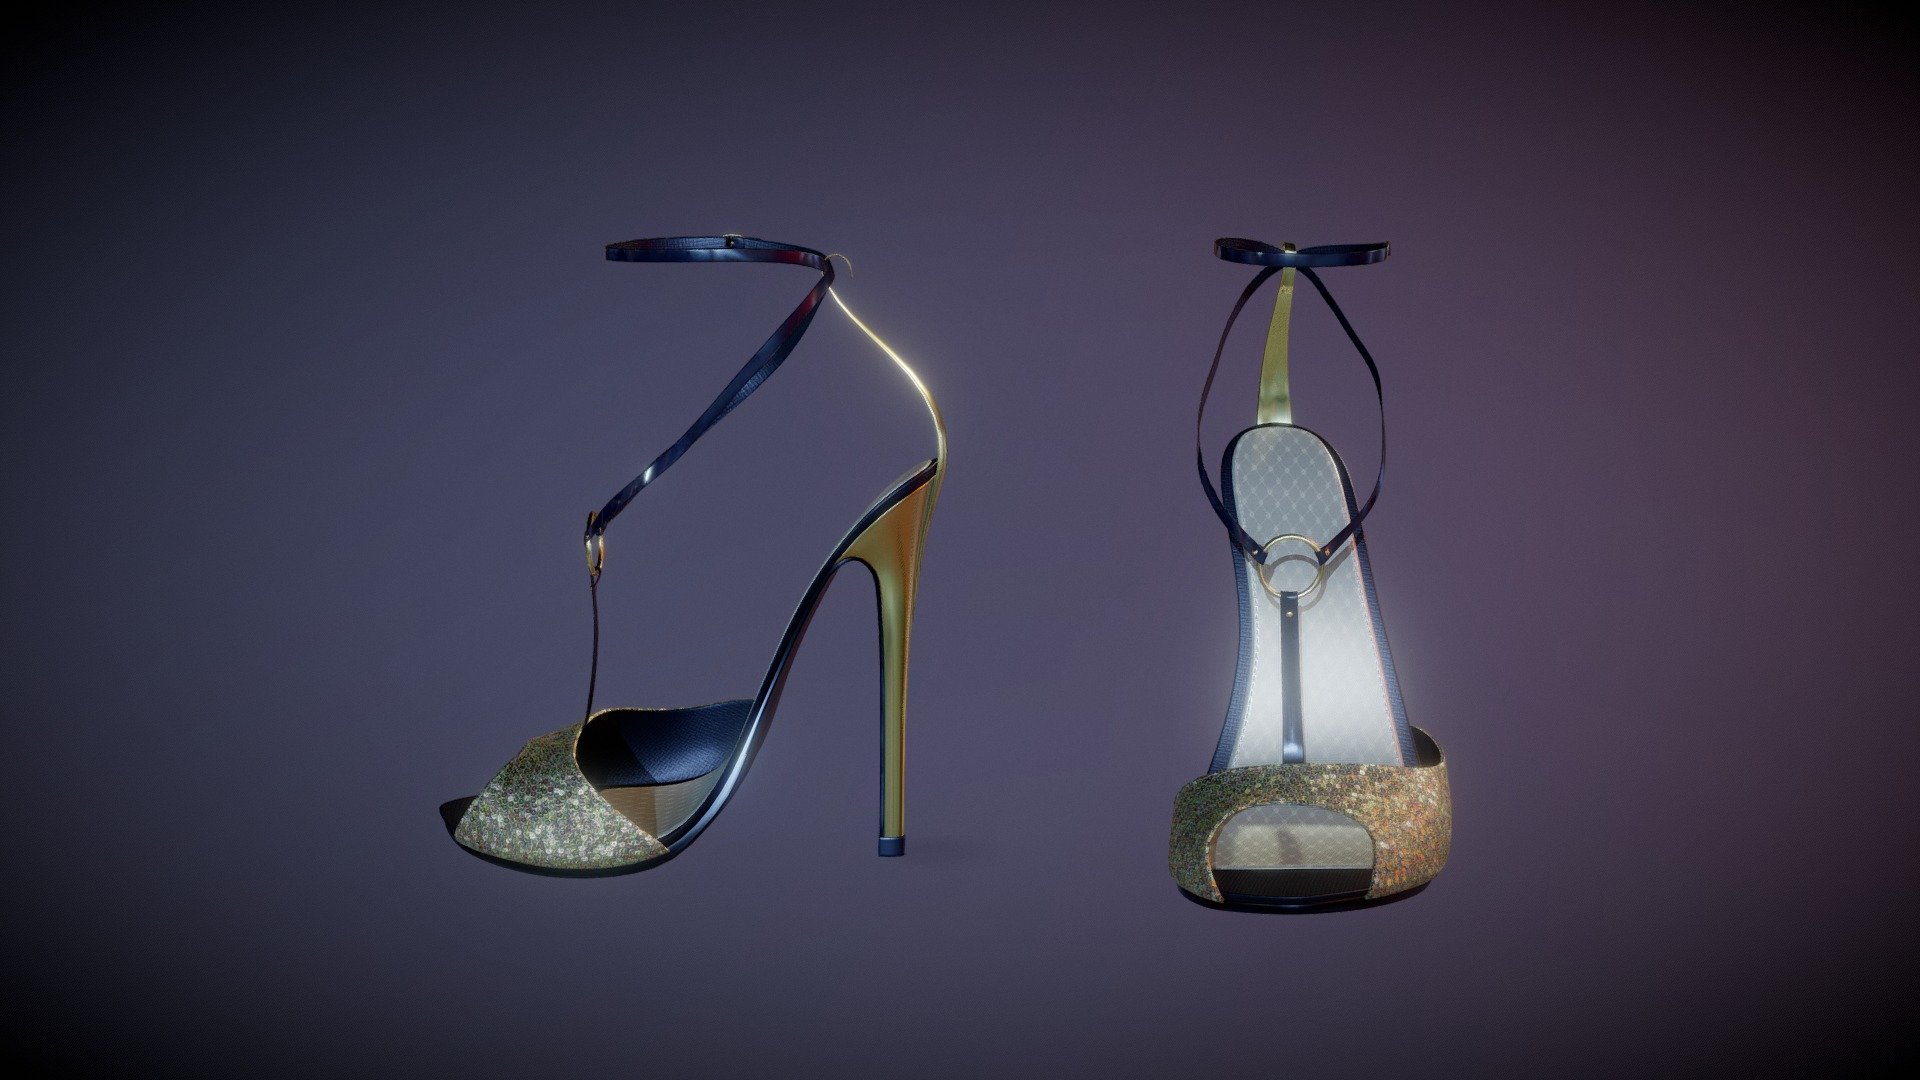 These are some high heel sandals I've designed, modeled and textured. Clean quad topology and clean UV's. The mesh is in FBX format and the textures are 4K. The sequin material used in the shoes is also available in my artstation shop;

https://mastajappa.artstation.com/store/mzpV/substance-sequin-material

I've released the model to be available for Character Creator 3 and iClone as a wearable item.

https://marketplace.reallusion.com/high-heel-sandals - Female High Heel Sandals - 3D model by Jasper Hesseling (@mayonnaise) 3d model